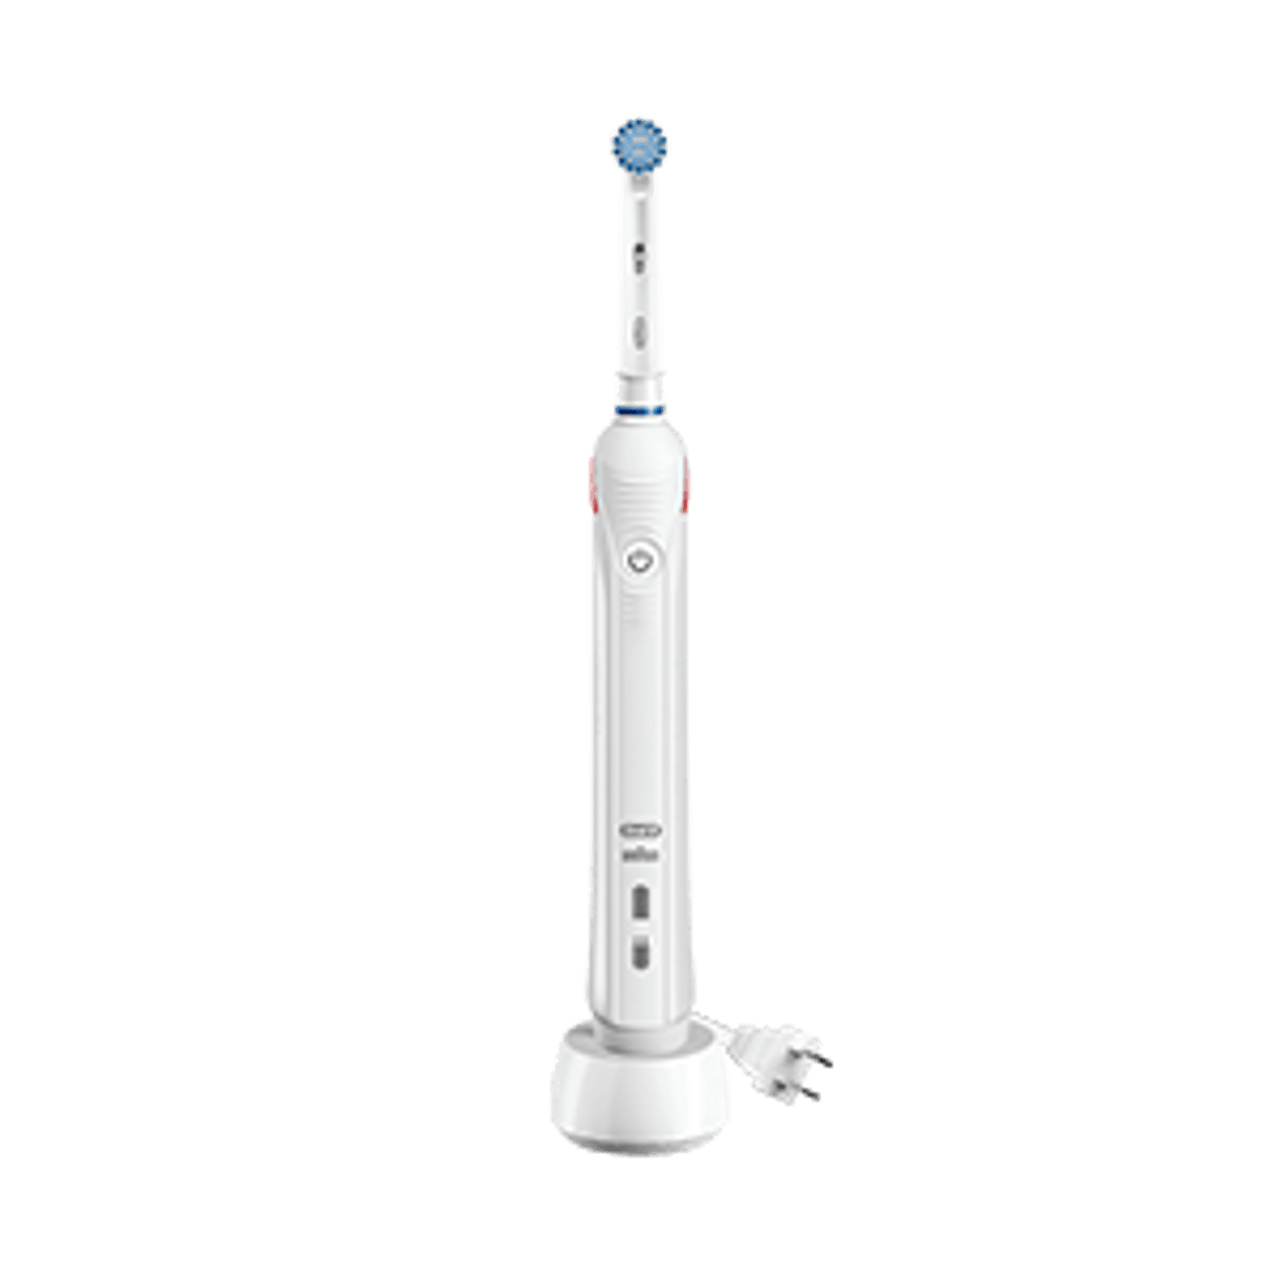 Oral-b Professional Care 1000 Power Toothbrush